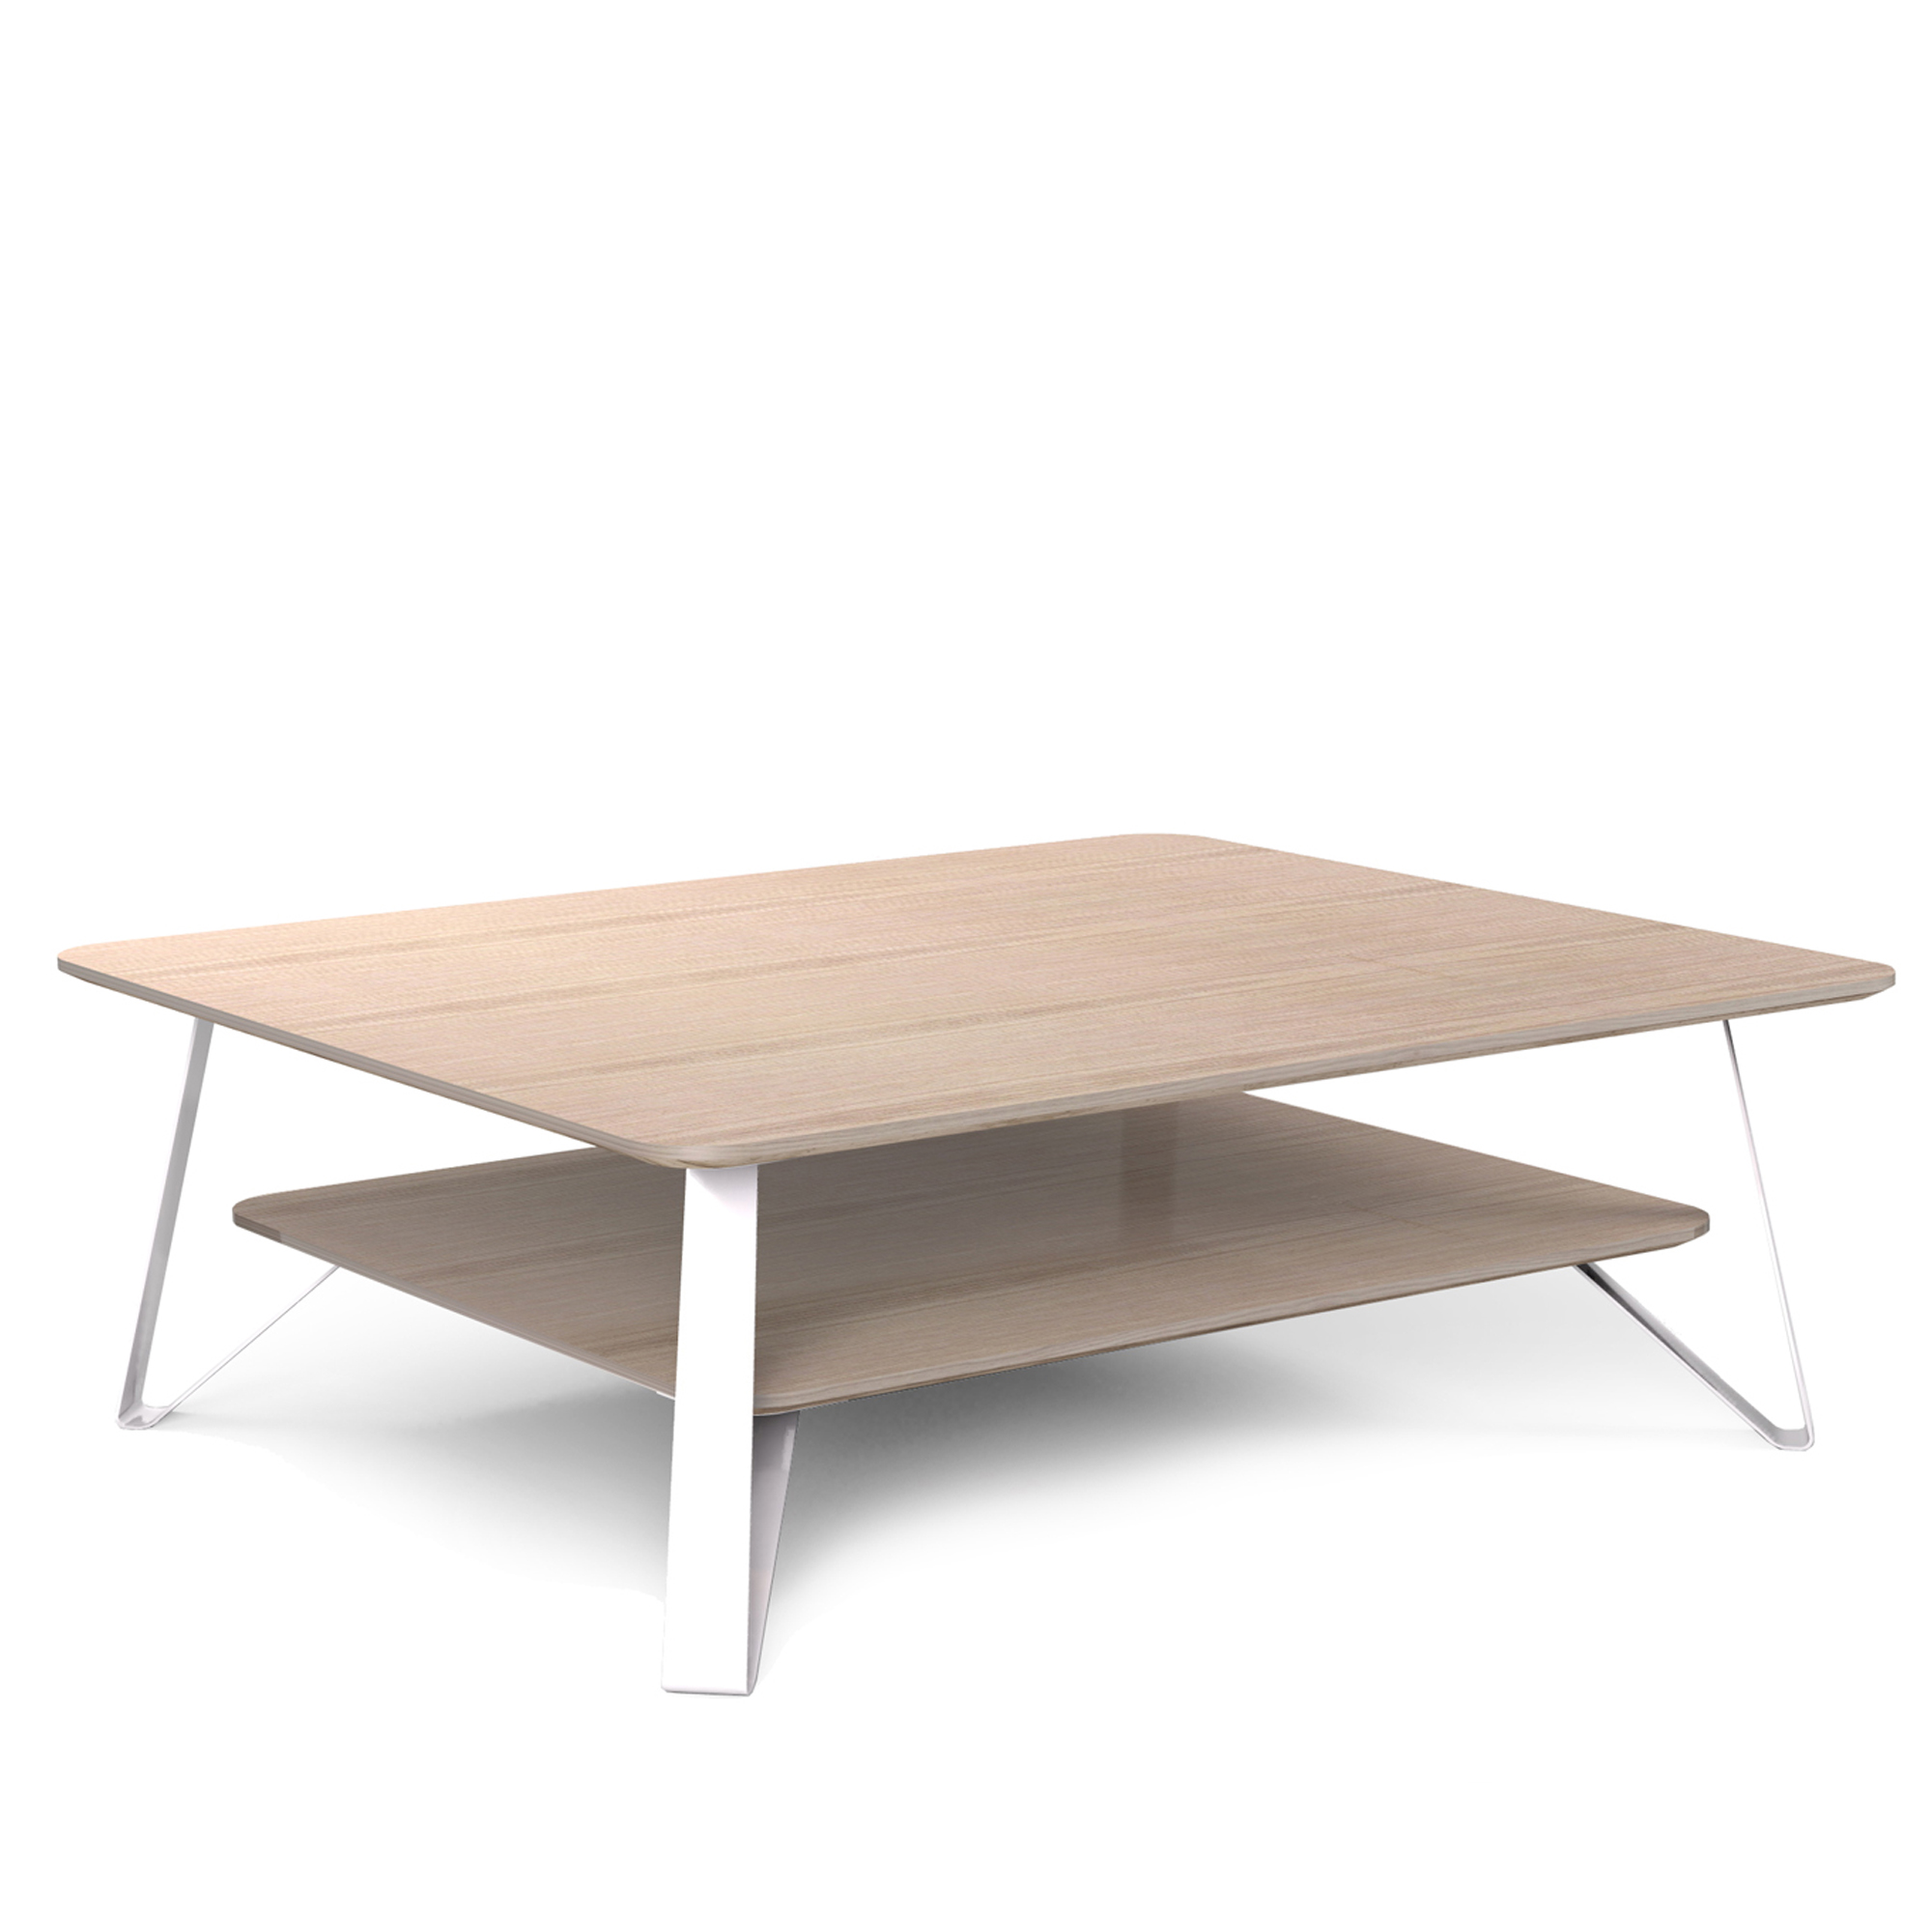 Table basse bois disign